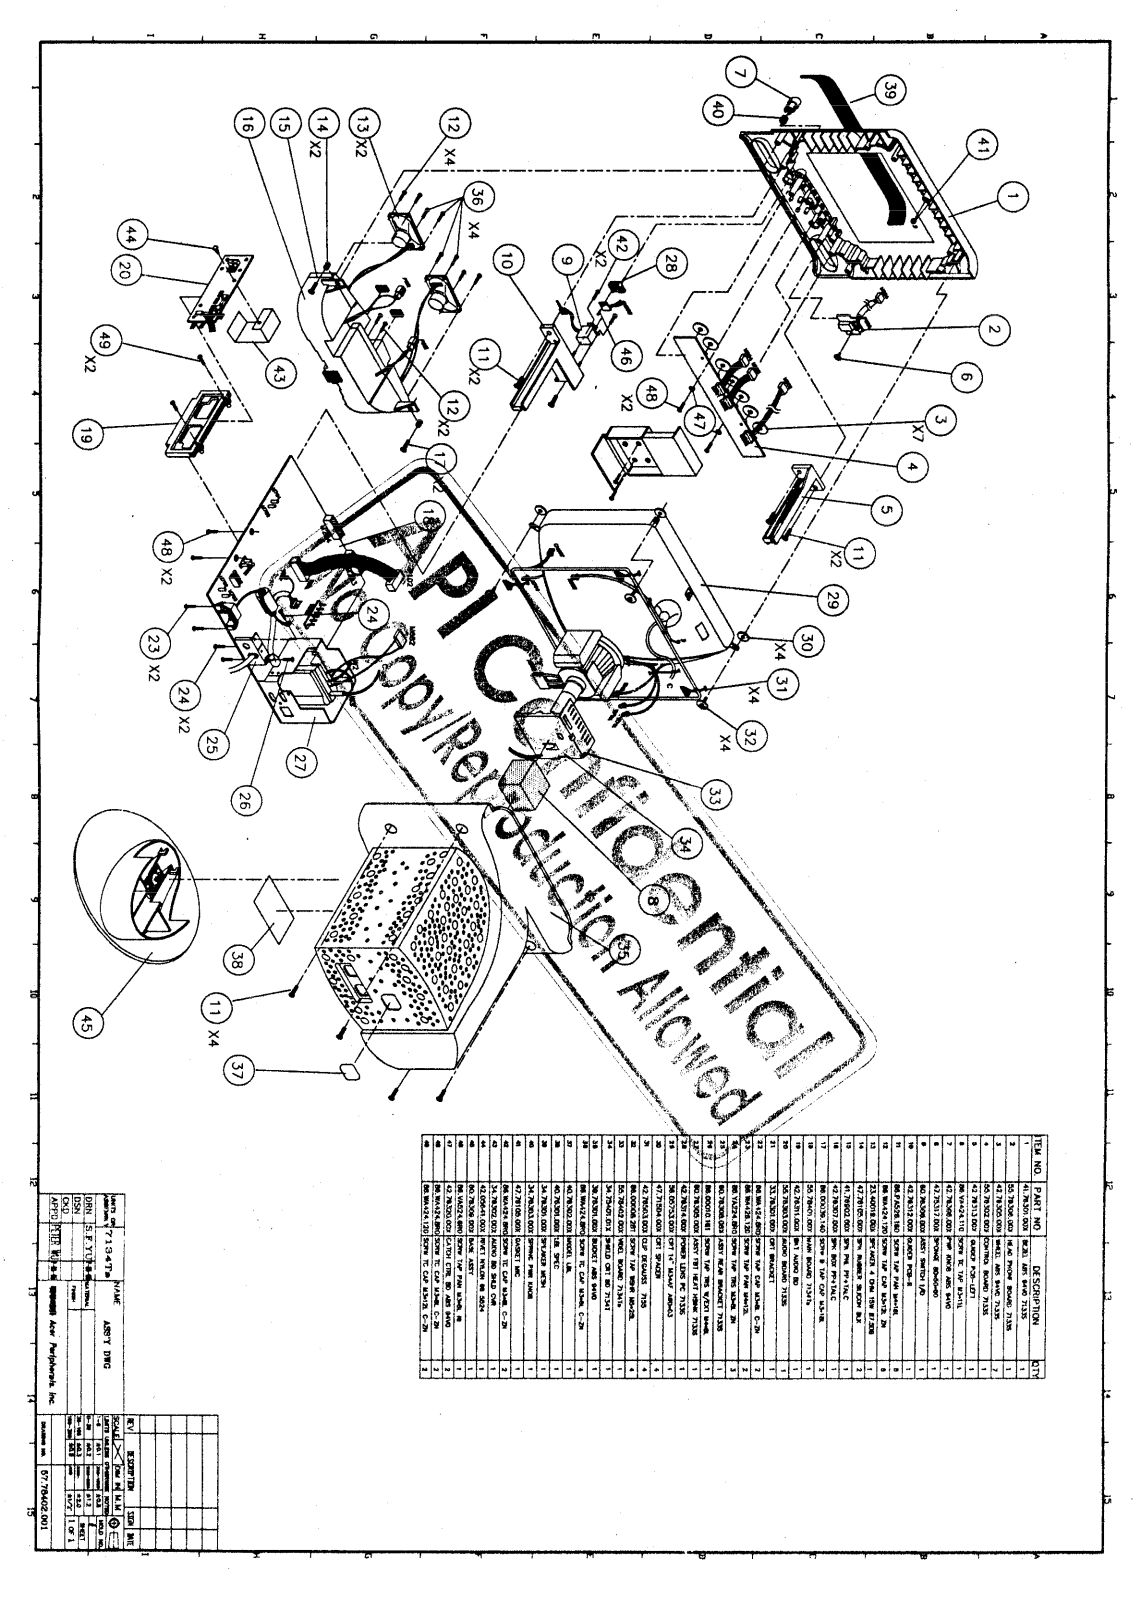 Acer 34TS, 7135S, 7434TS Schematic